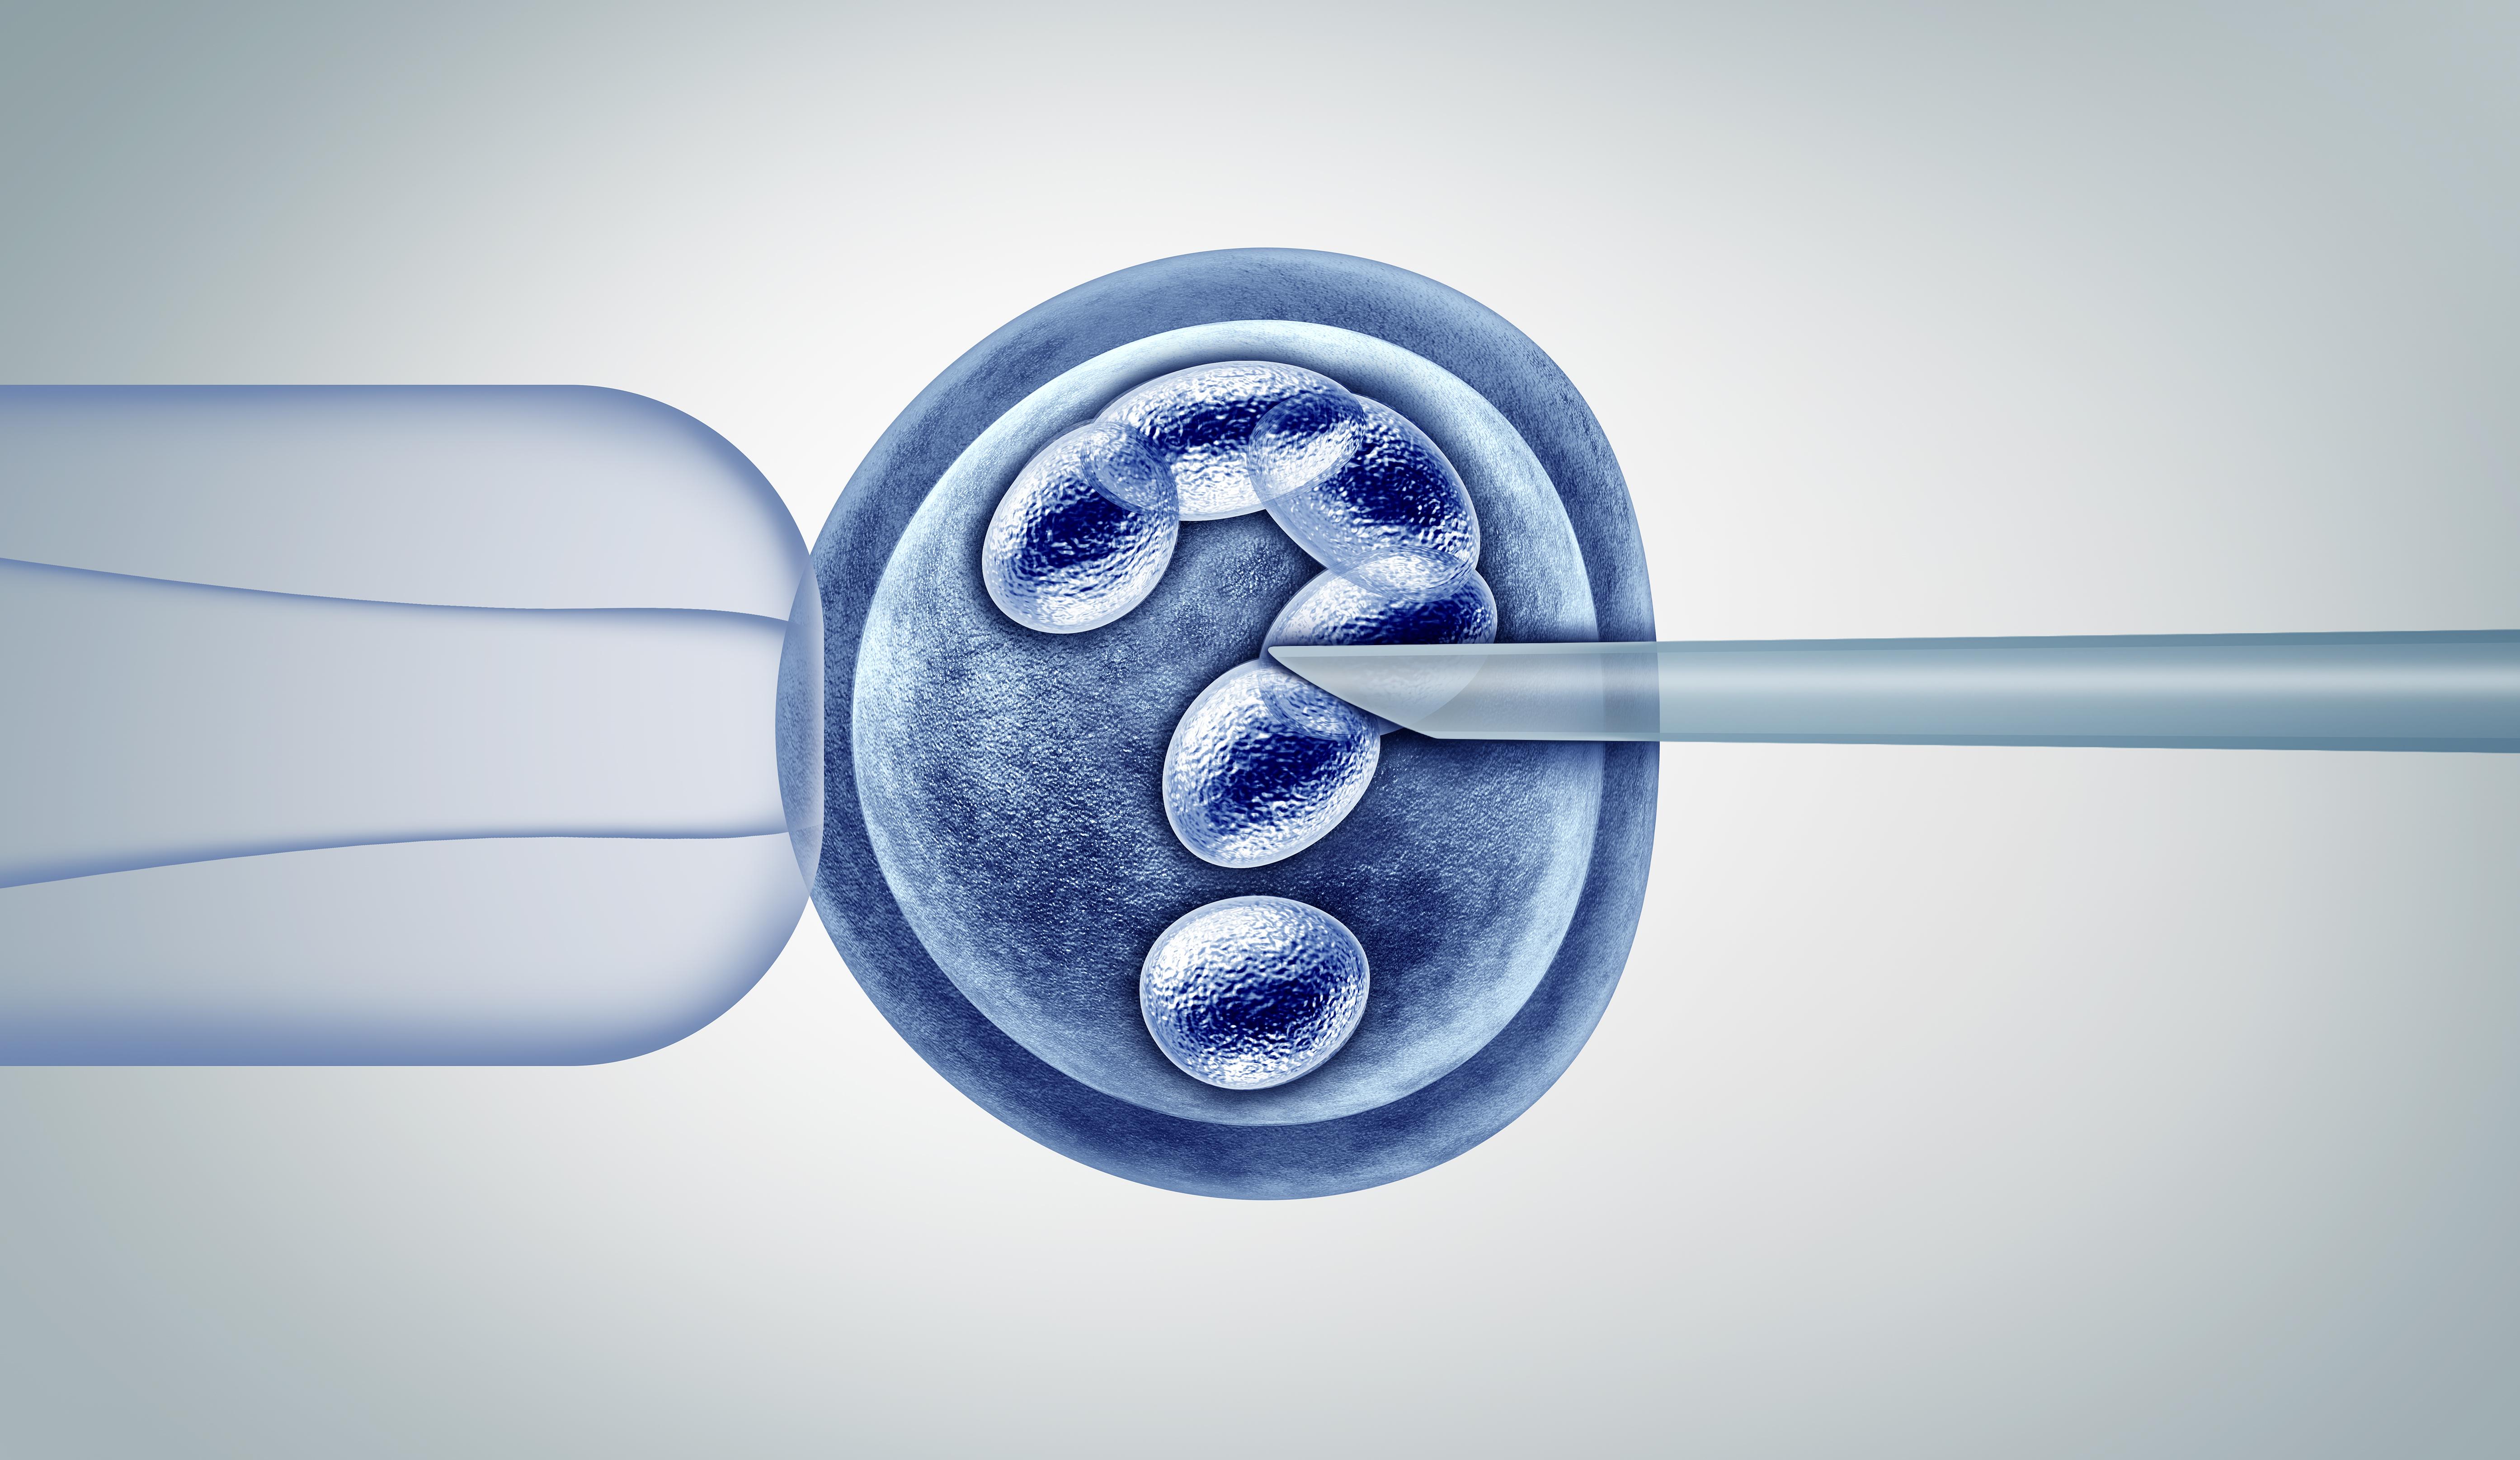 IVF with the cells in the embryo in the shape of a question mark